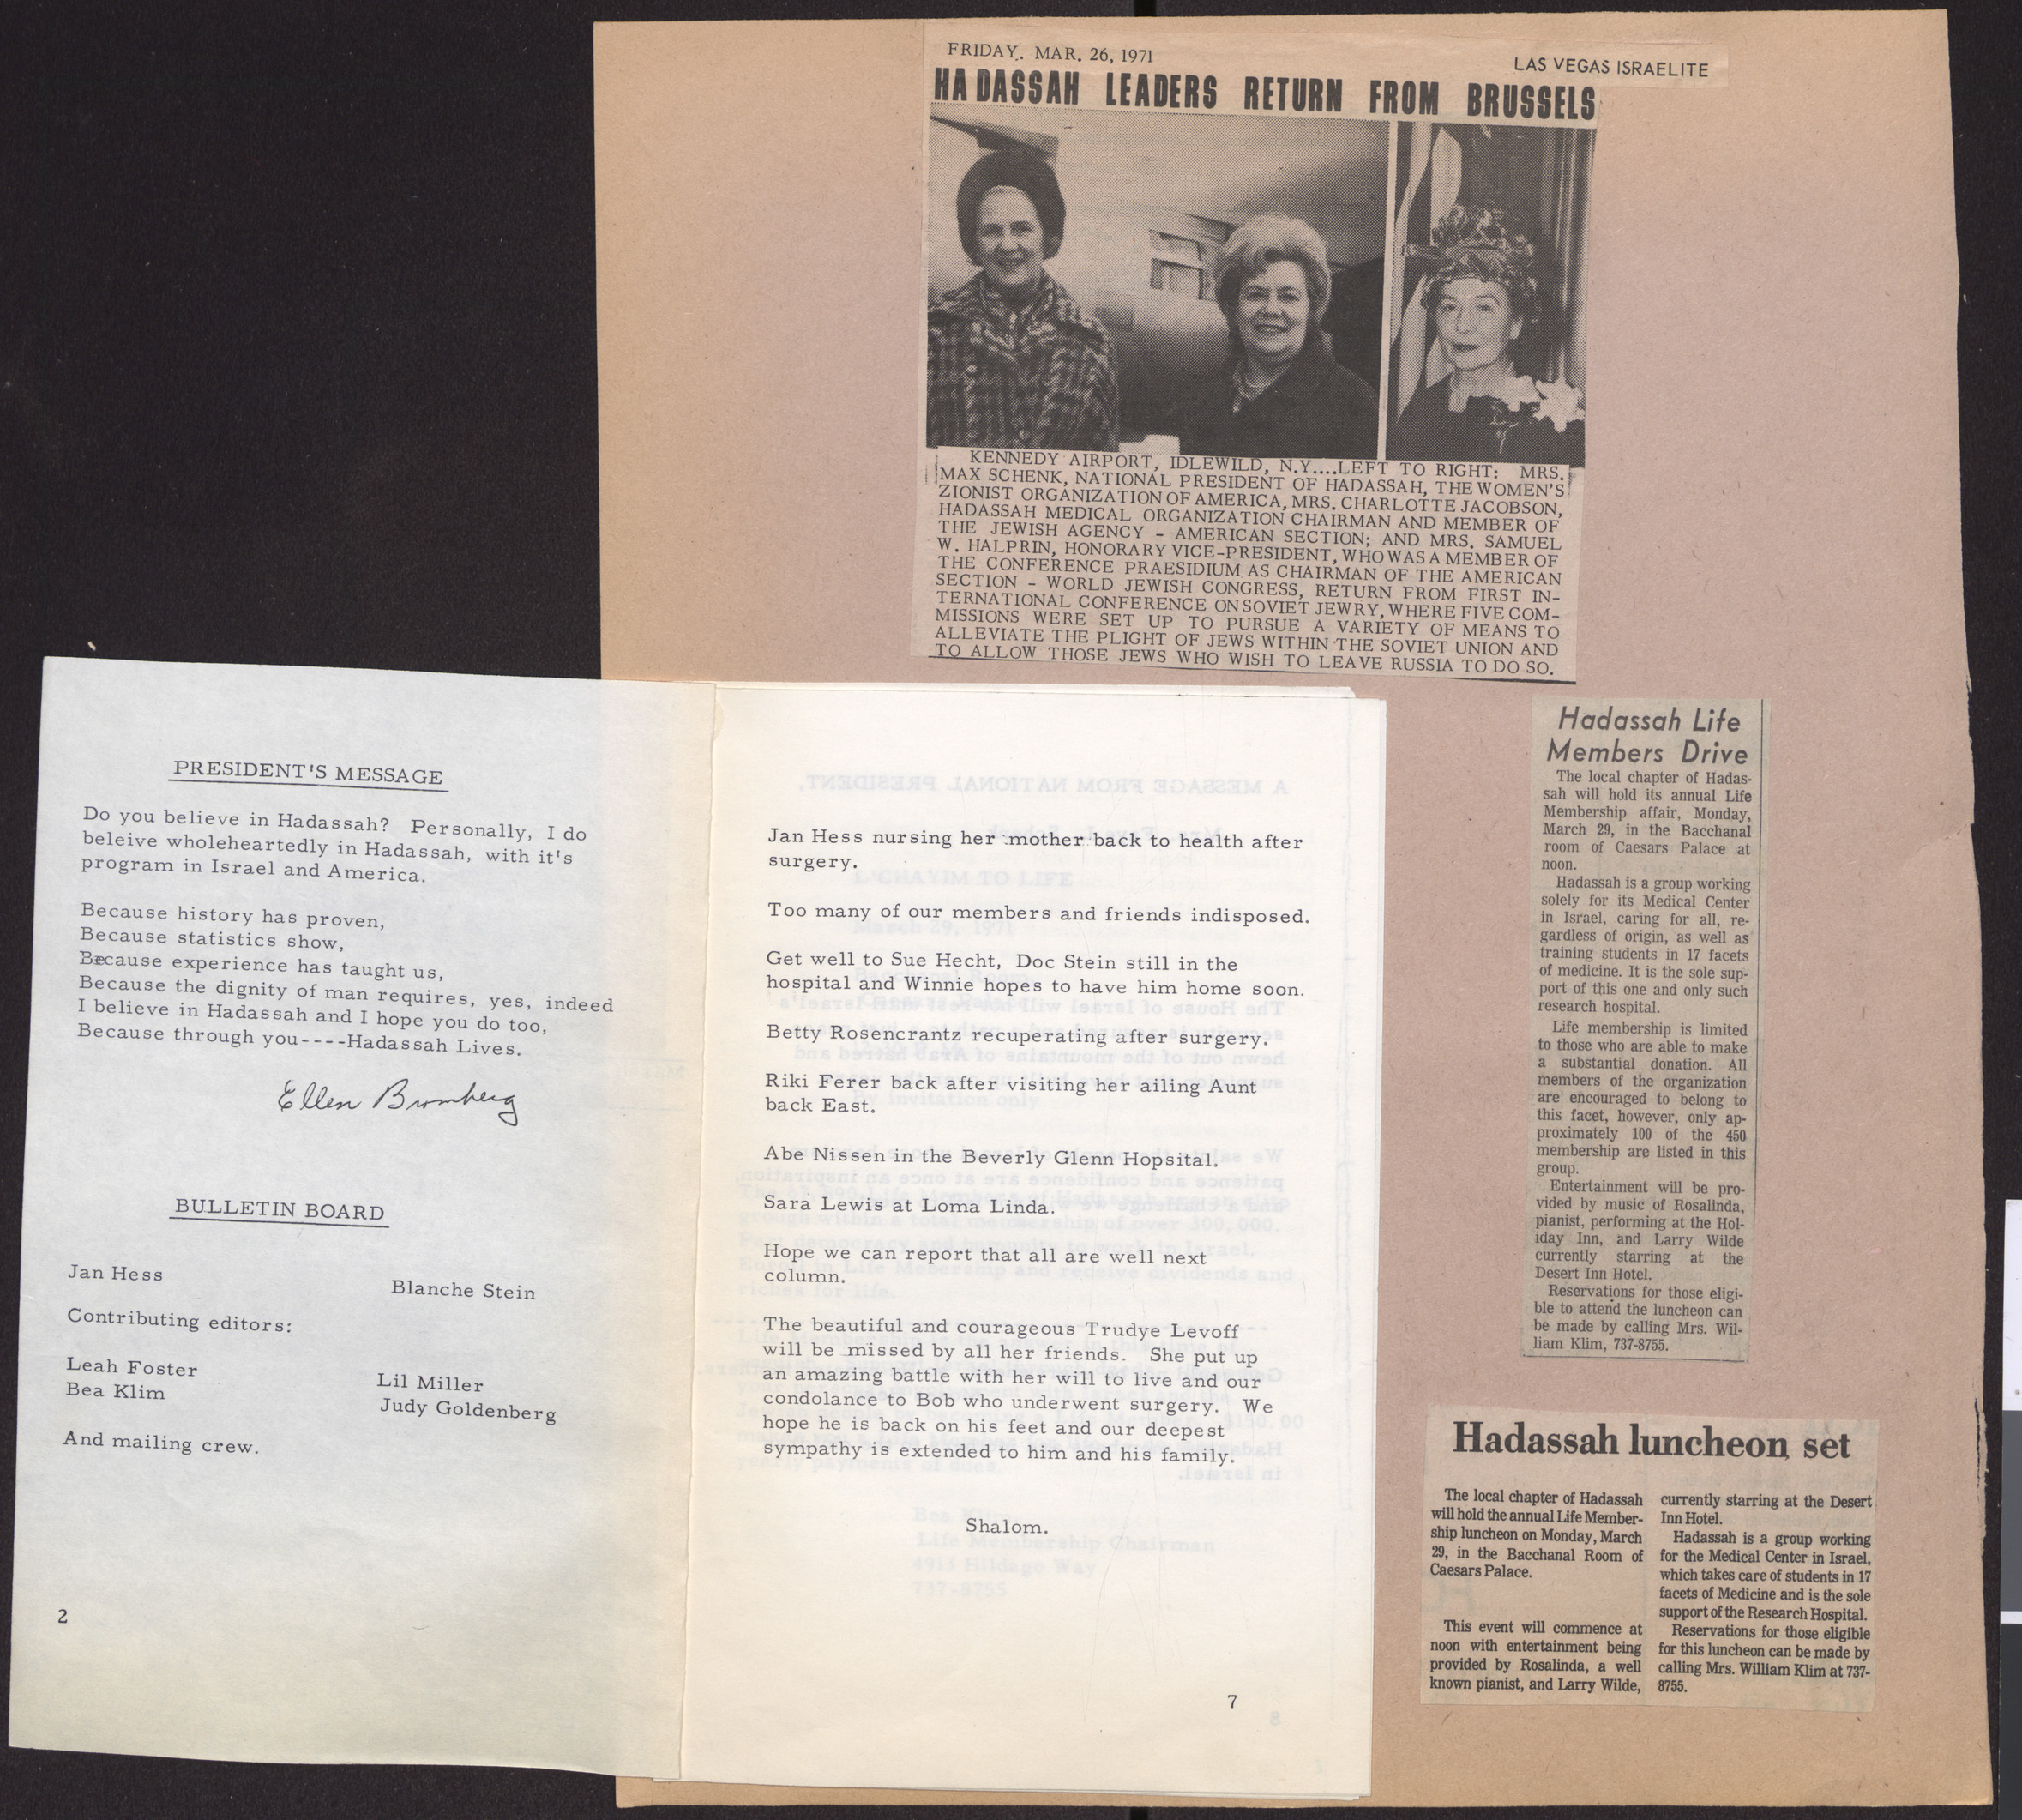 Hadassah newsletter, March 1971, pages 2 and 7